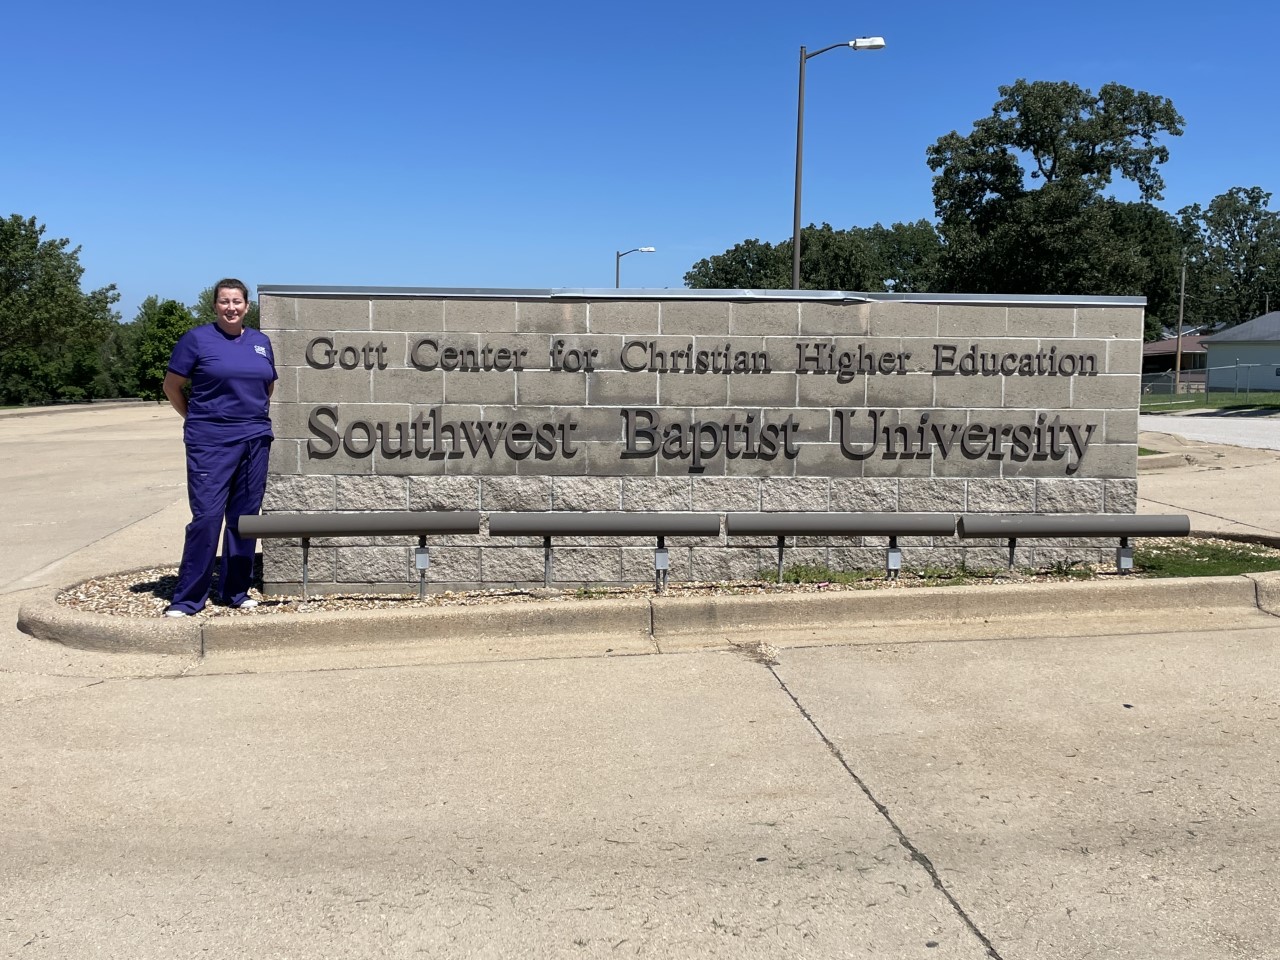 Marleana Coombs, recipient of the Doe Run Company Nursing Scholarship Fund, stands outside the Gott Center for Higher Education at Southwest Baptist University in Bolivar, Missouri.